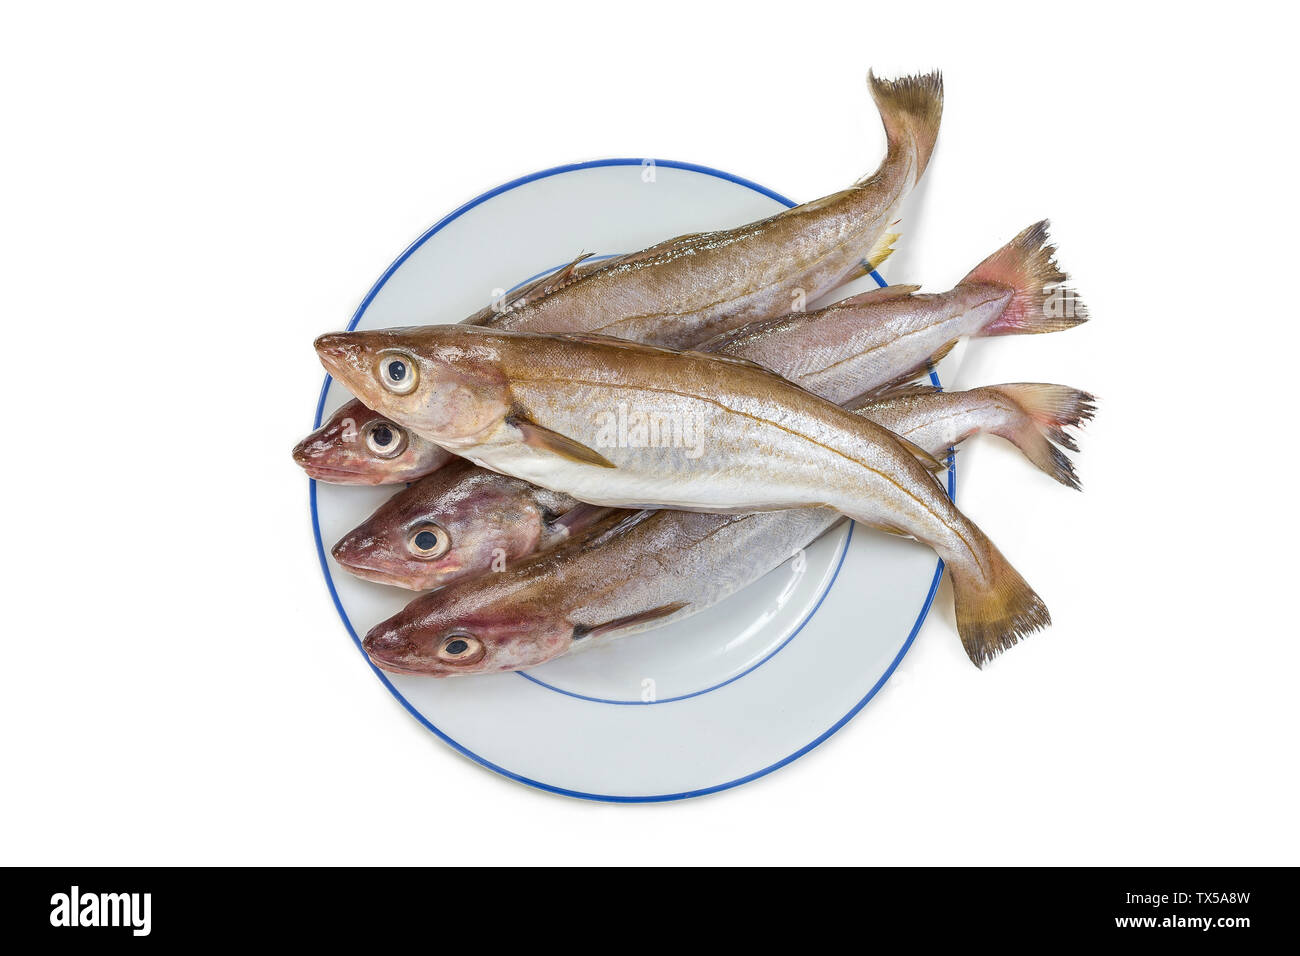 Whiting or food fish Merlangius or whithing fild on a plate on white background Stock Photo